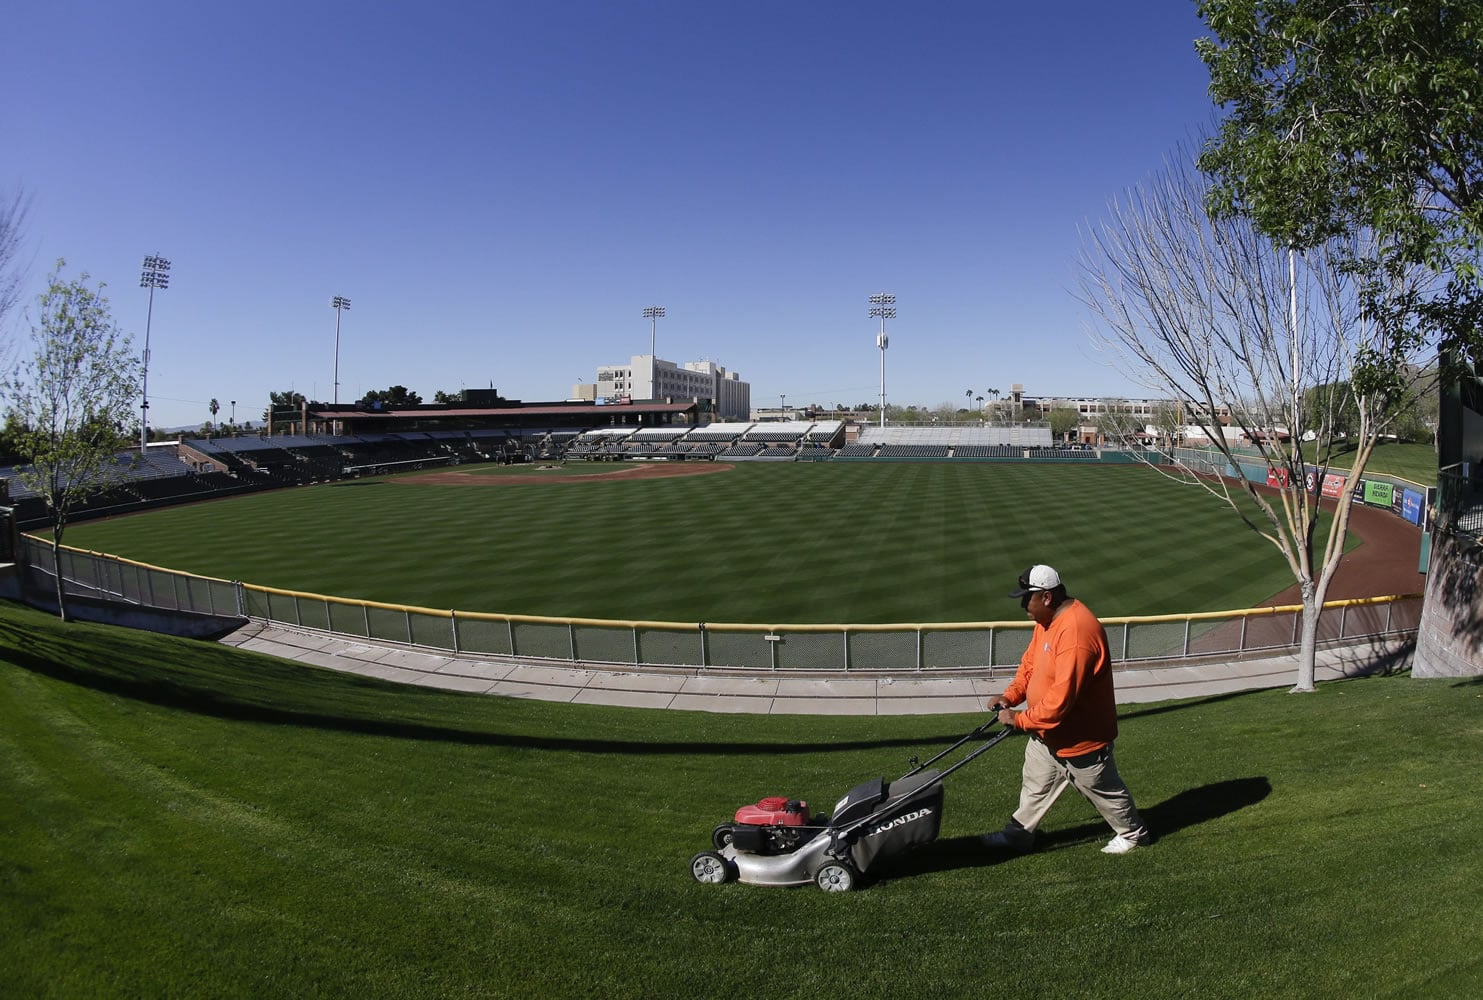 A member of the grounds crew cuts the grass Wednesday in the outfield where the San Francisco Giants are set to begin their spring baseball season in Scottsdale, Ariz. High temperatures in nearby Phoenix broke a record.